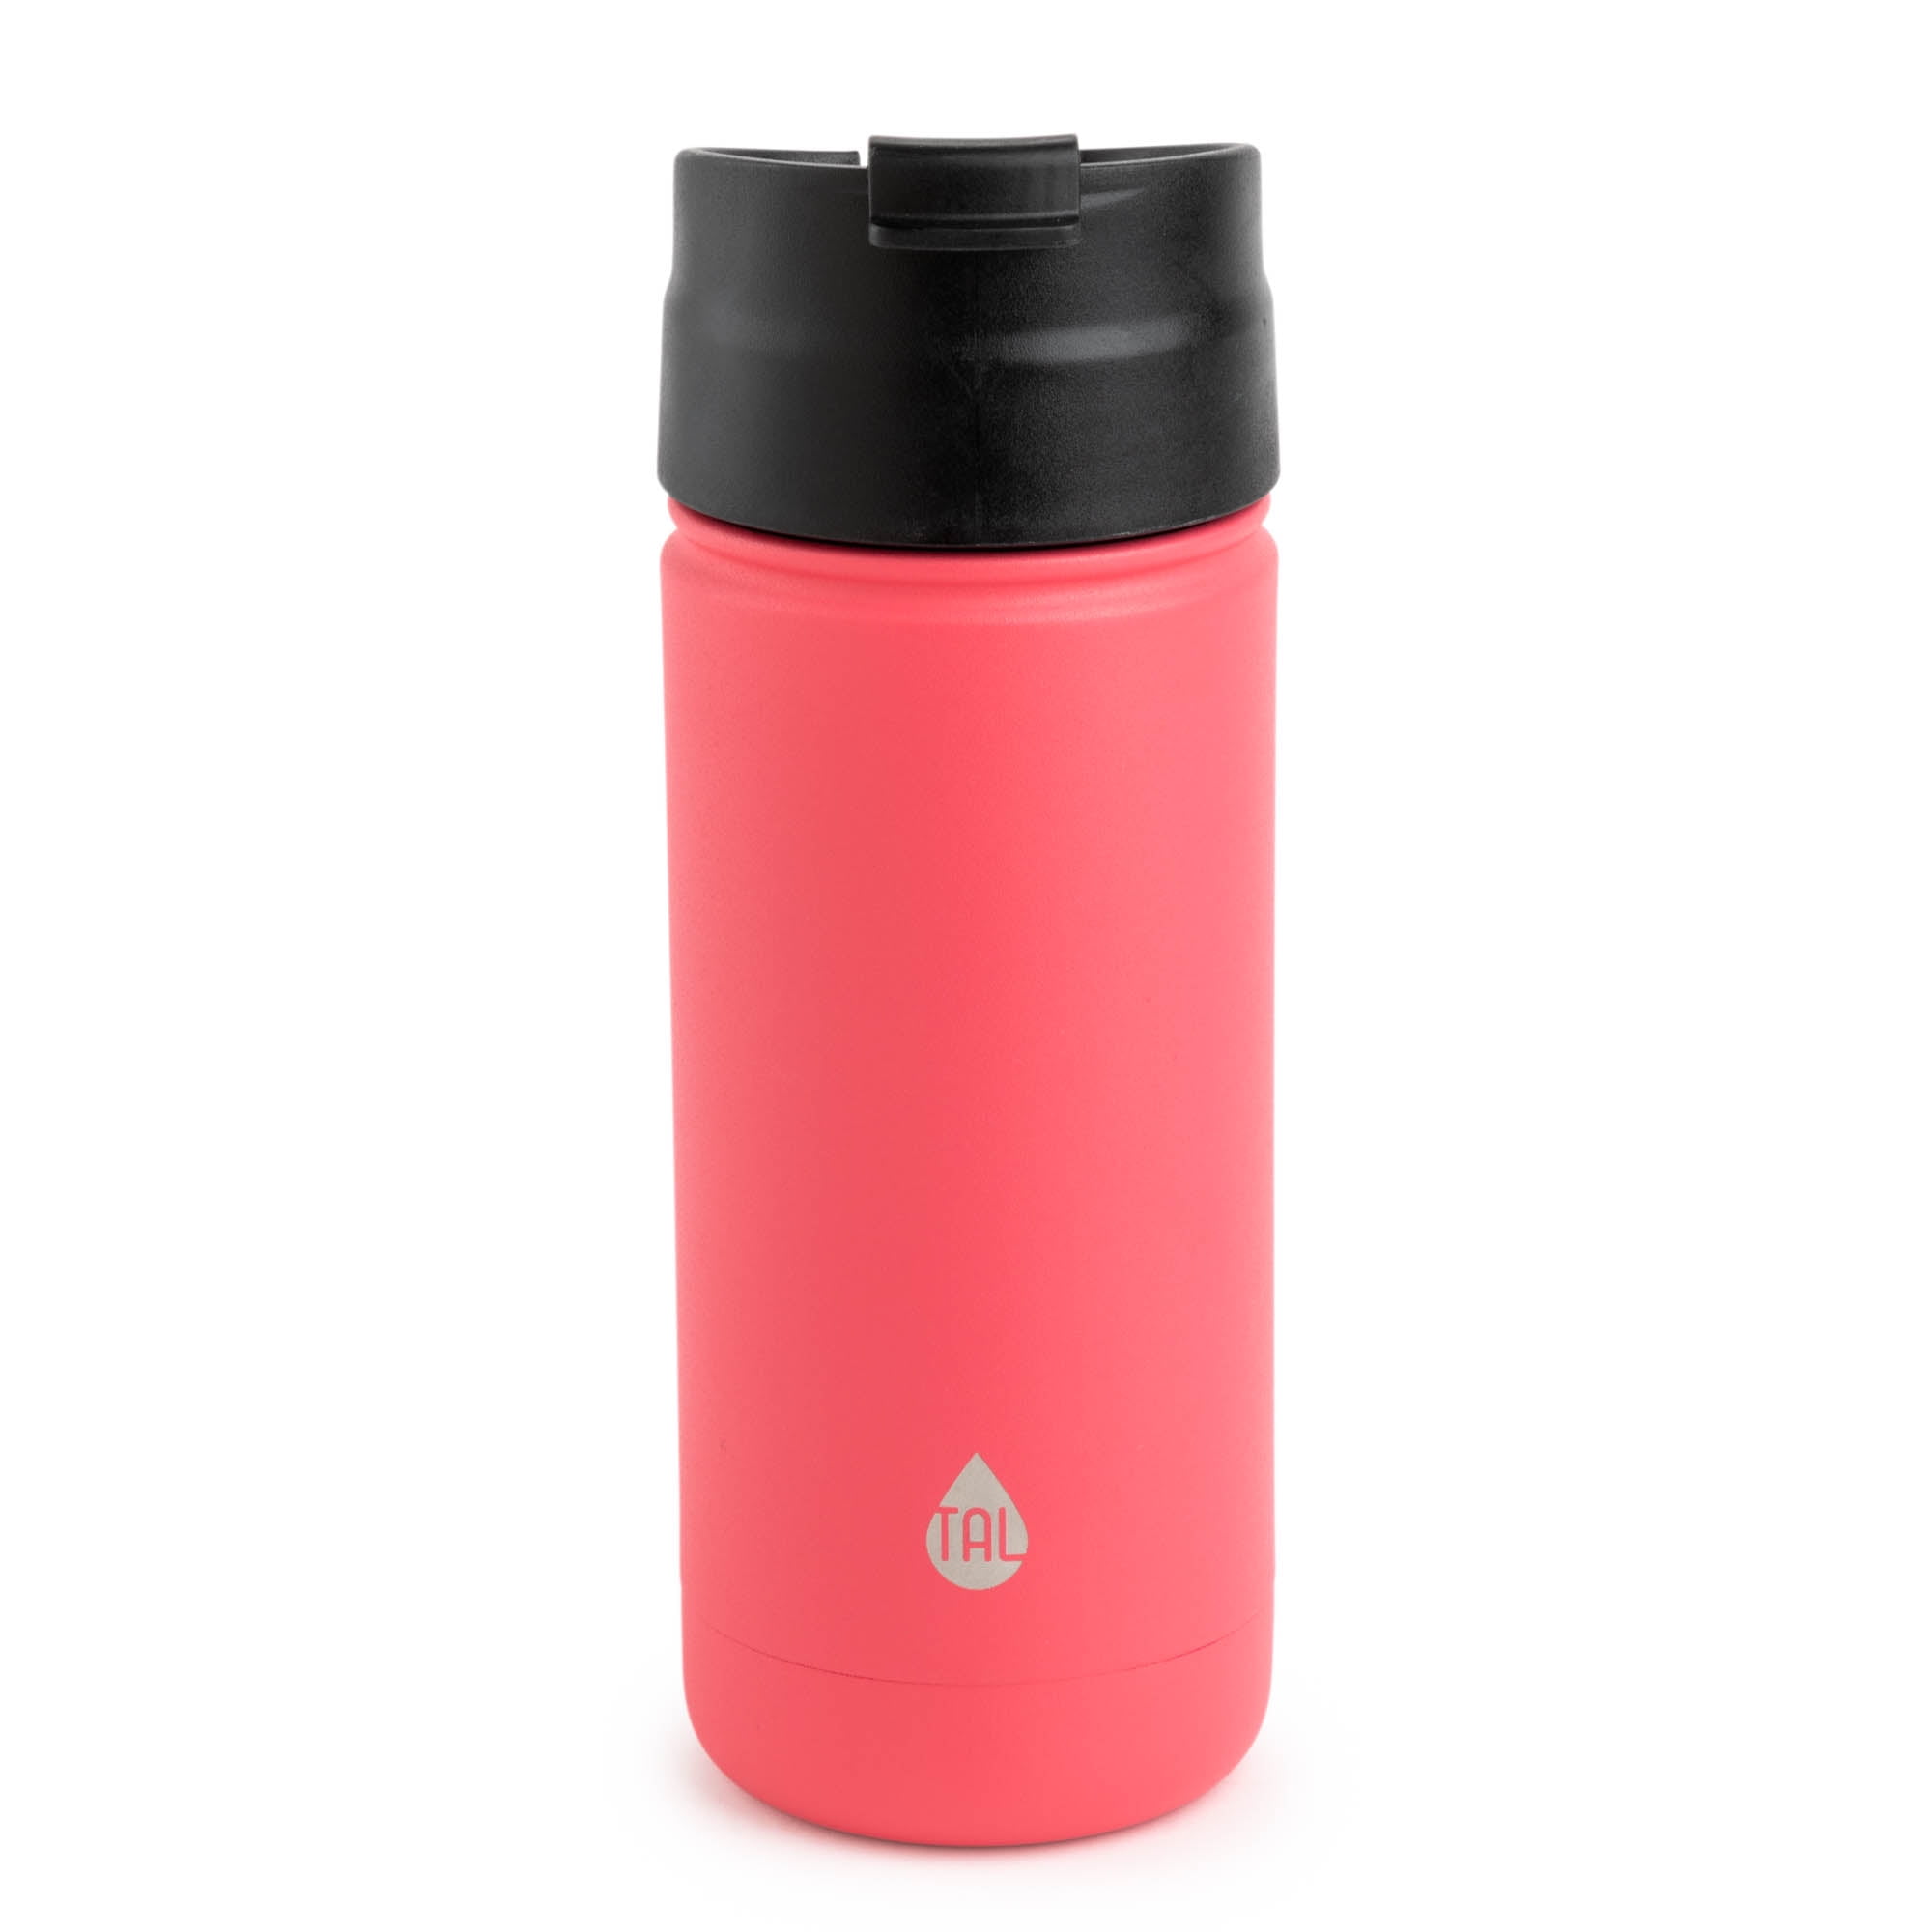 Dropship TAL Stainless Steel Basin Travel Mug 30 Oz, Pink to Sell Online at  a Lower Price